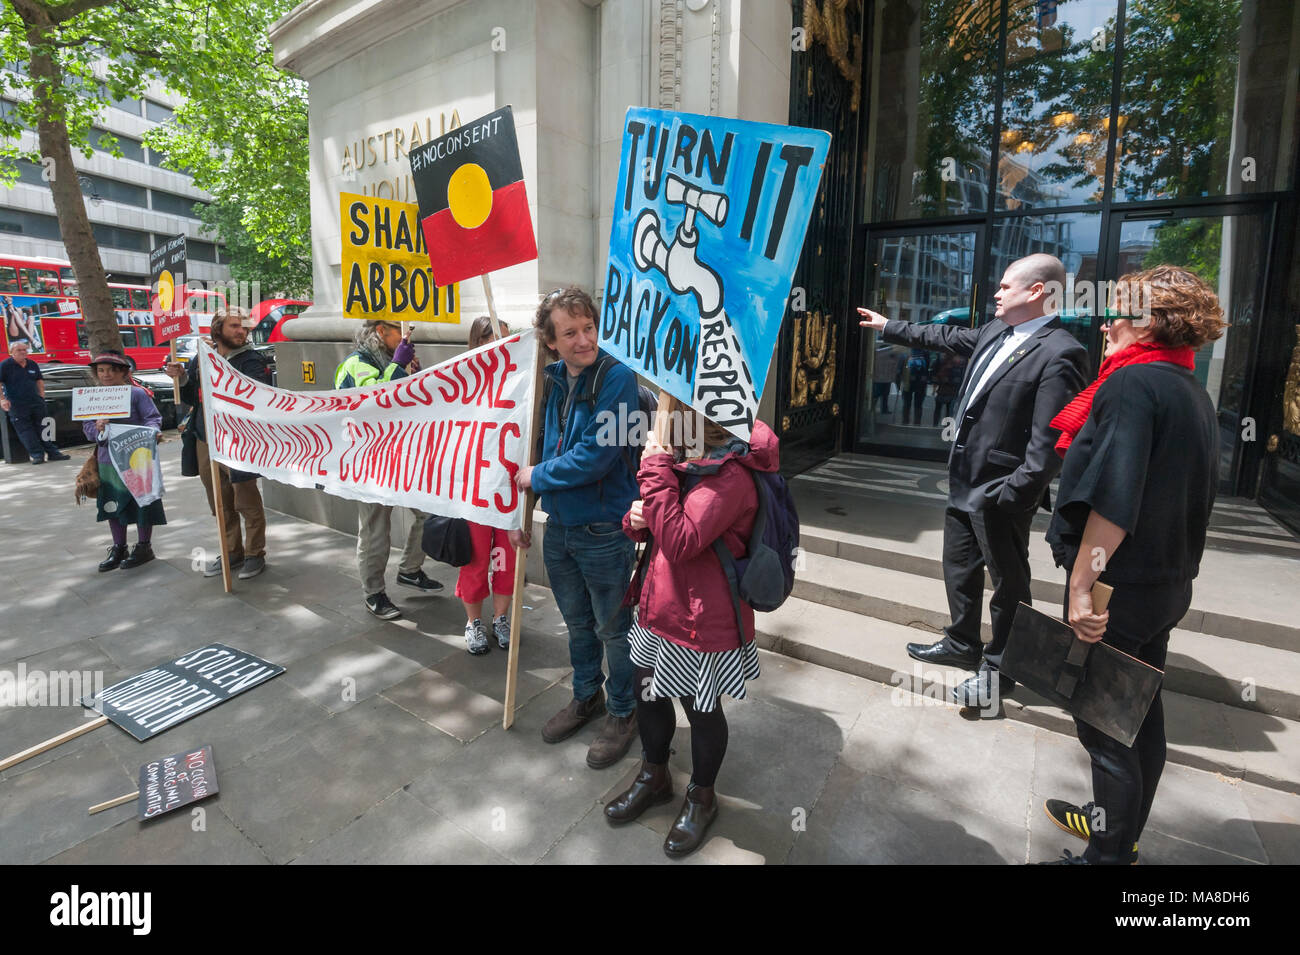 A man from Australia House tells protesters  demanding an end to forced closure of Aborigine Communities that they must keep away from the building. Stock Photo